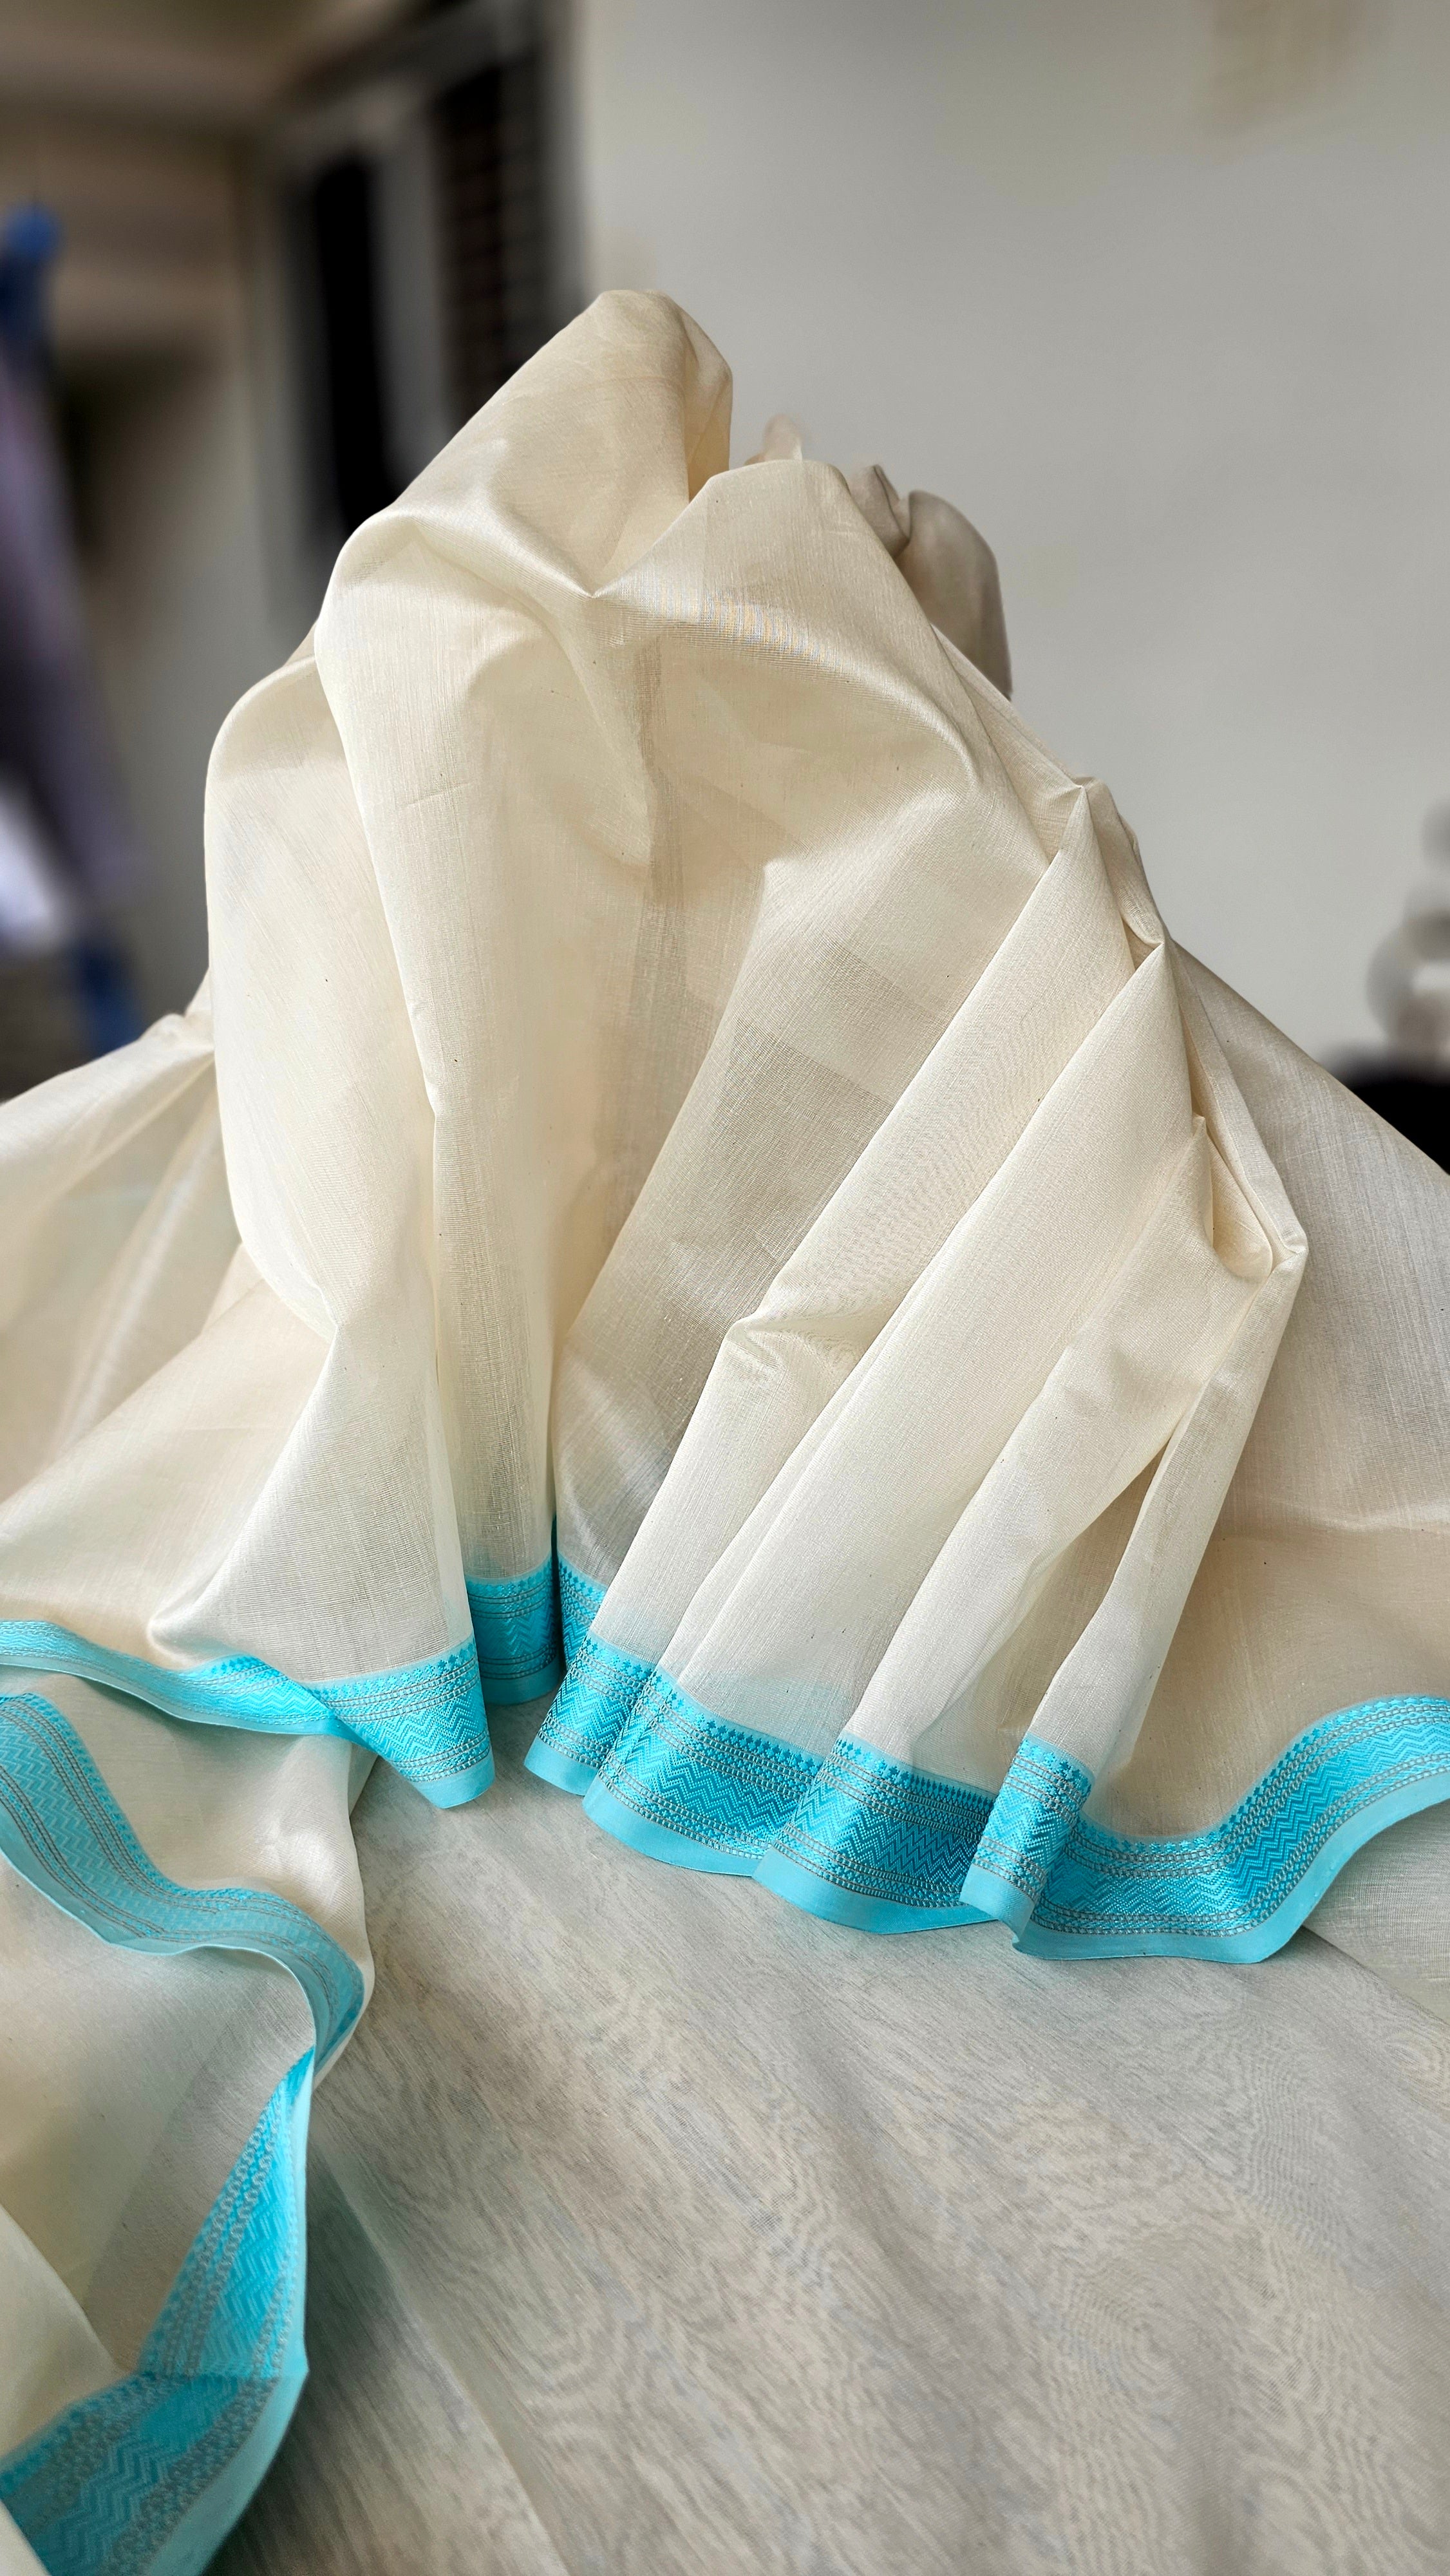 An Off White Saree with Turquoise Blue Resham Borders.